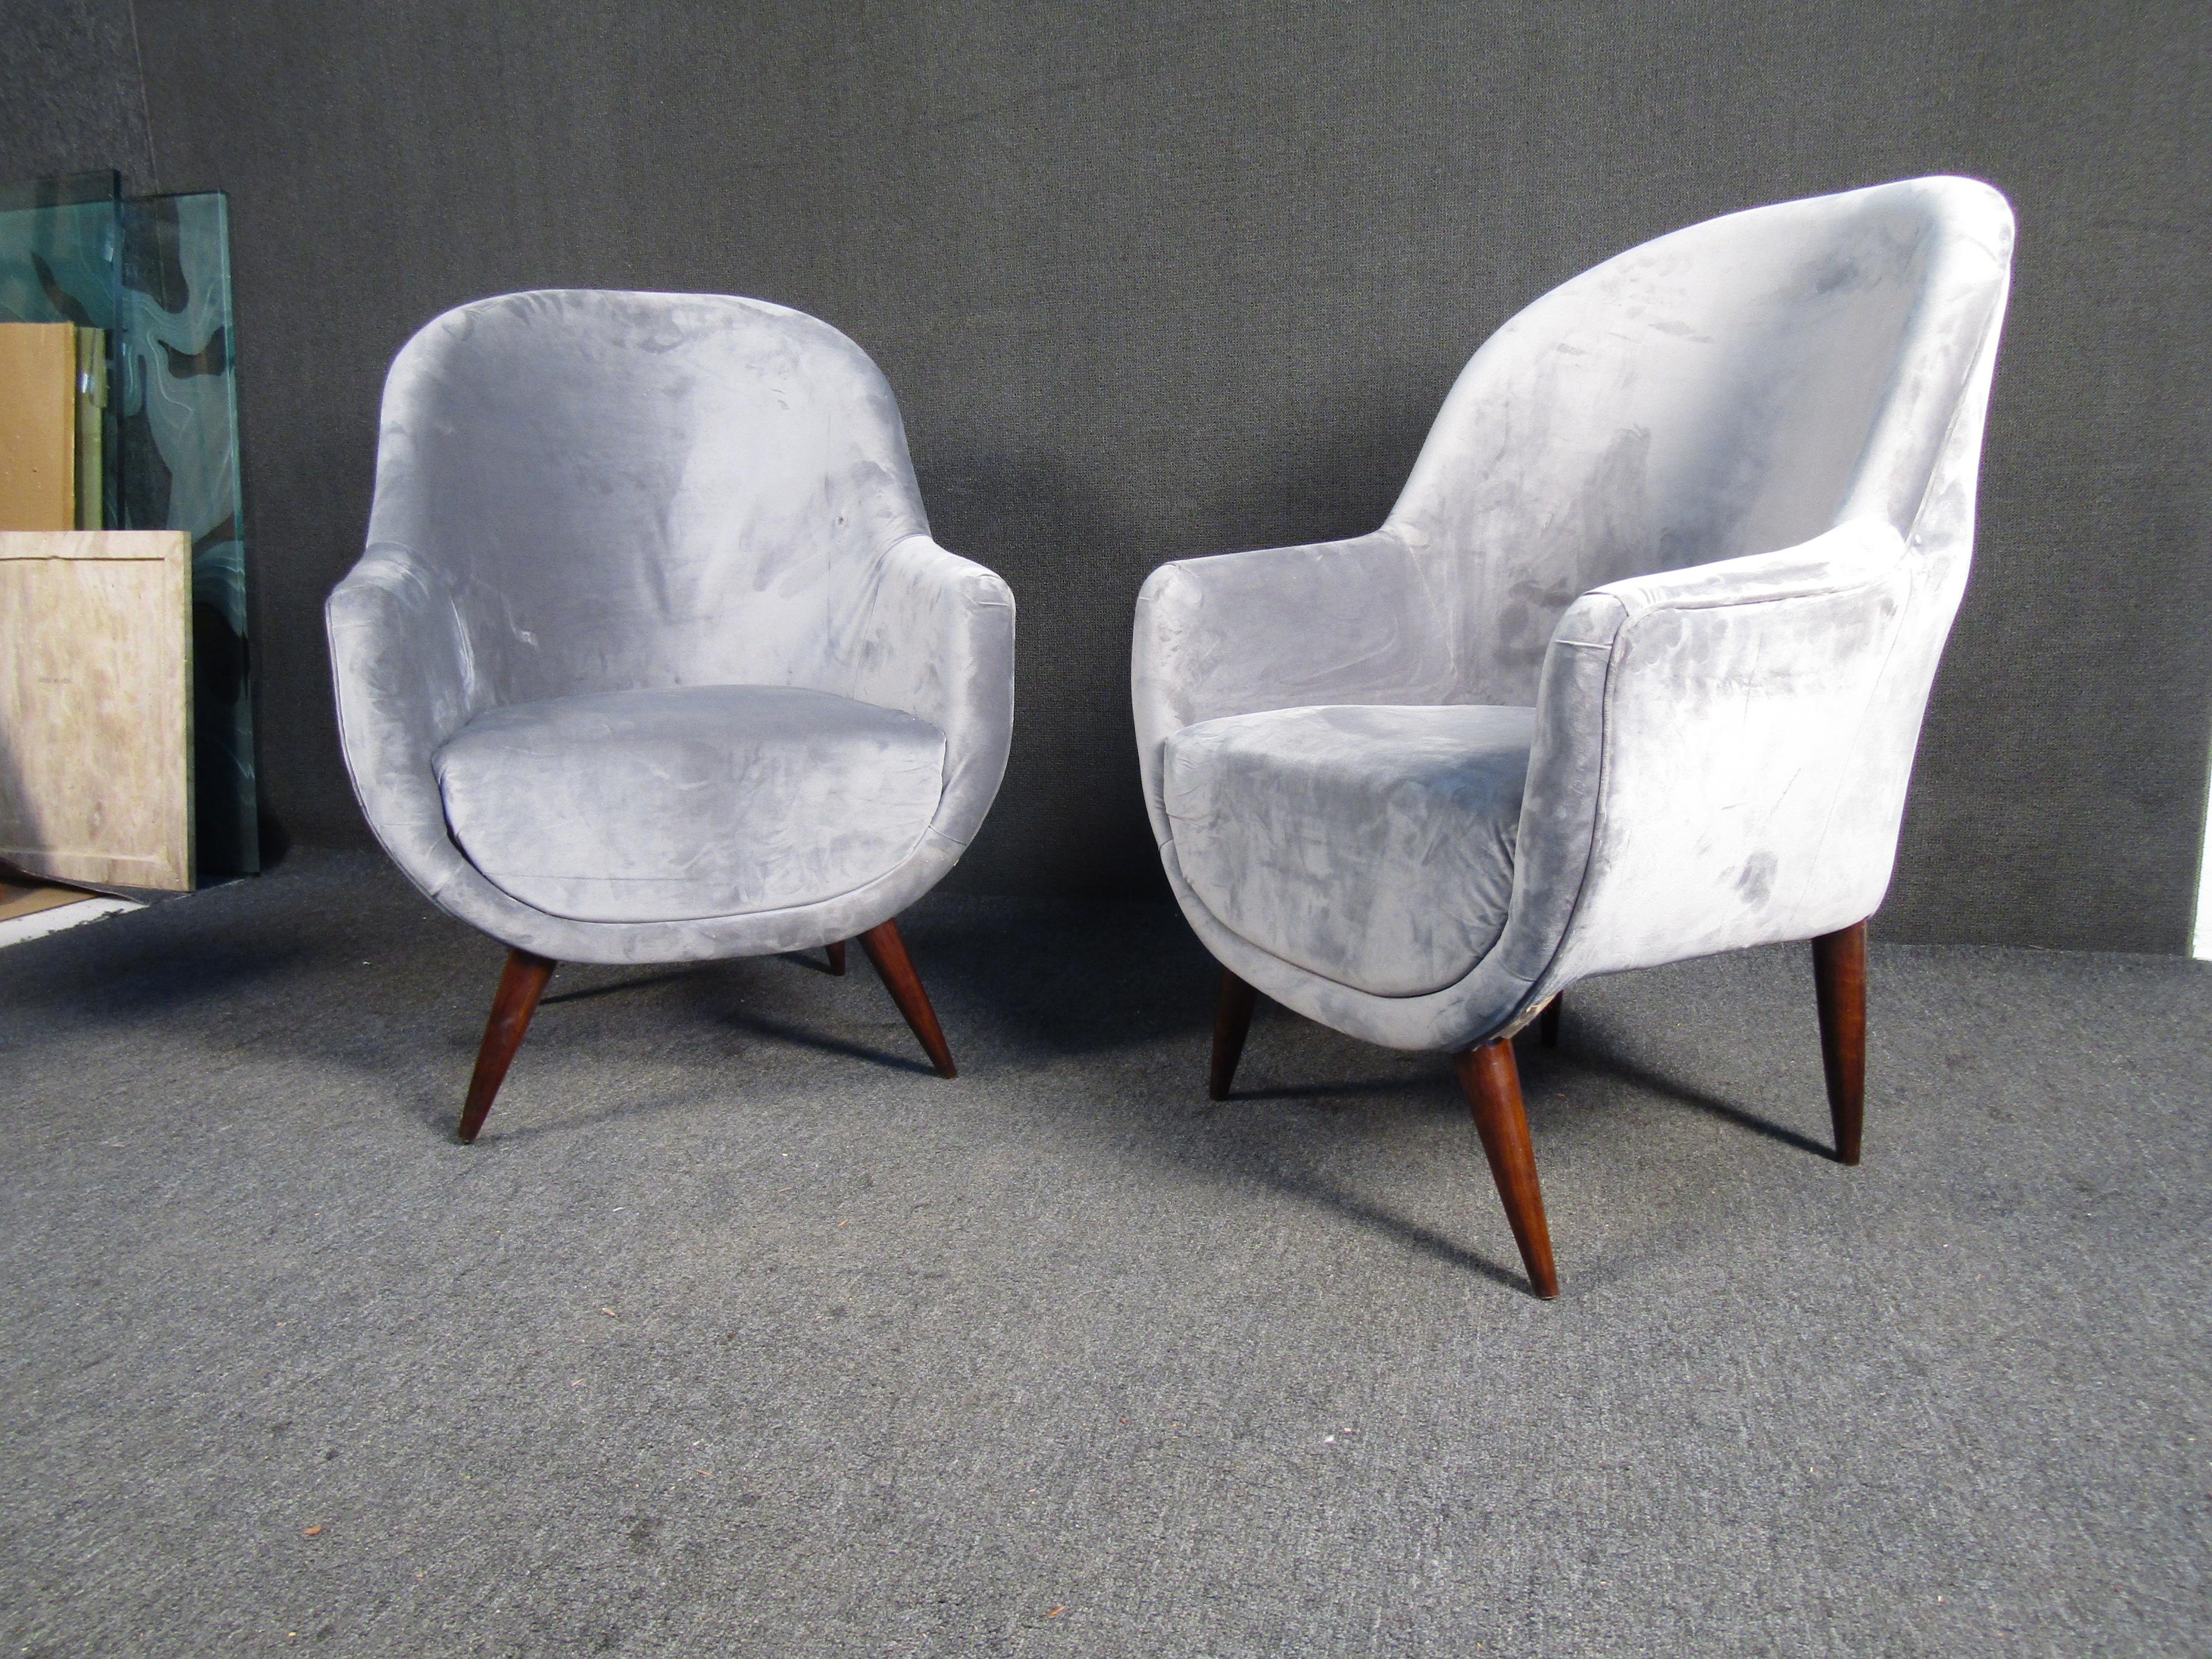 Unique vintage modern lounge chairs. These plush lounge chairs are upholstered in a comfy fabric with tapered wooden legs. The uniquely shaped chairs are sure to be a conversation starter. Perfect chairs for entertaining!

Please confirm item